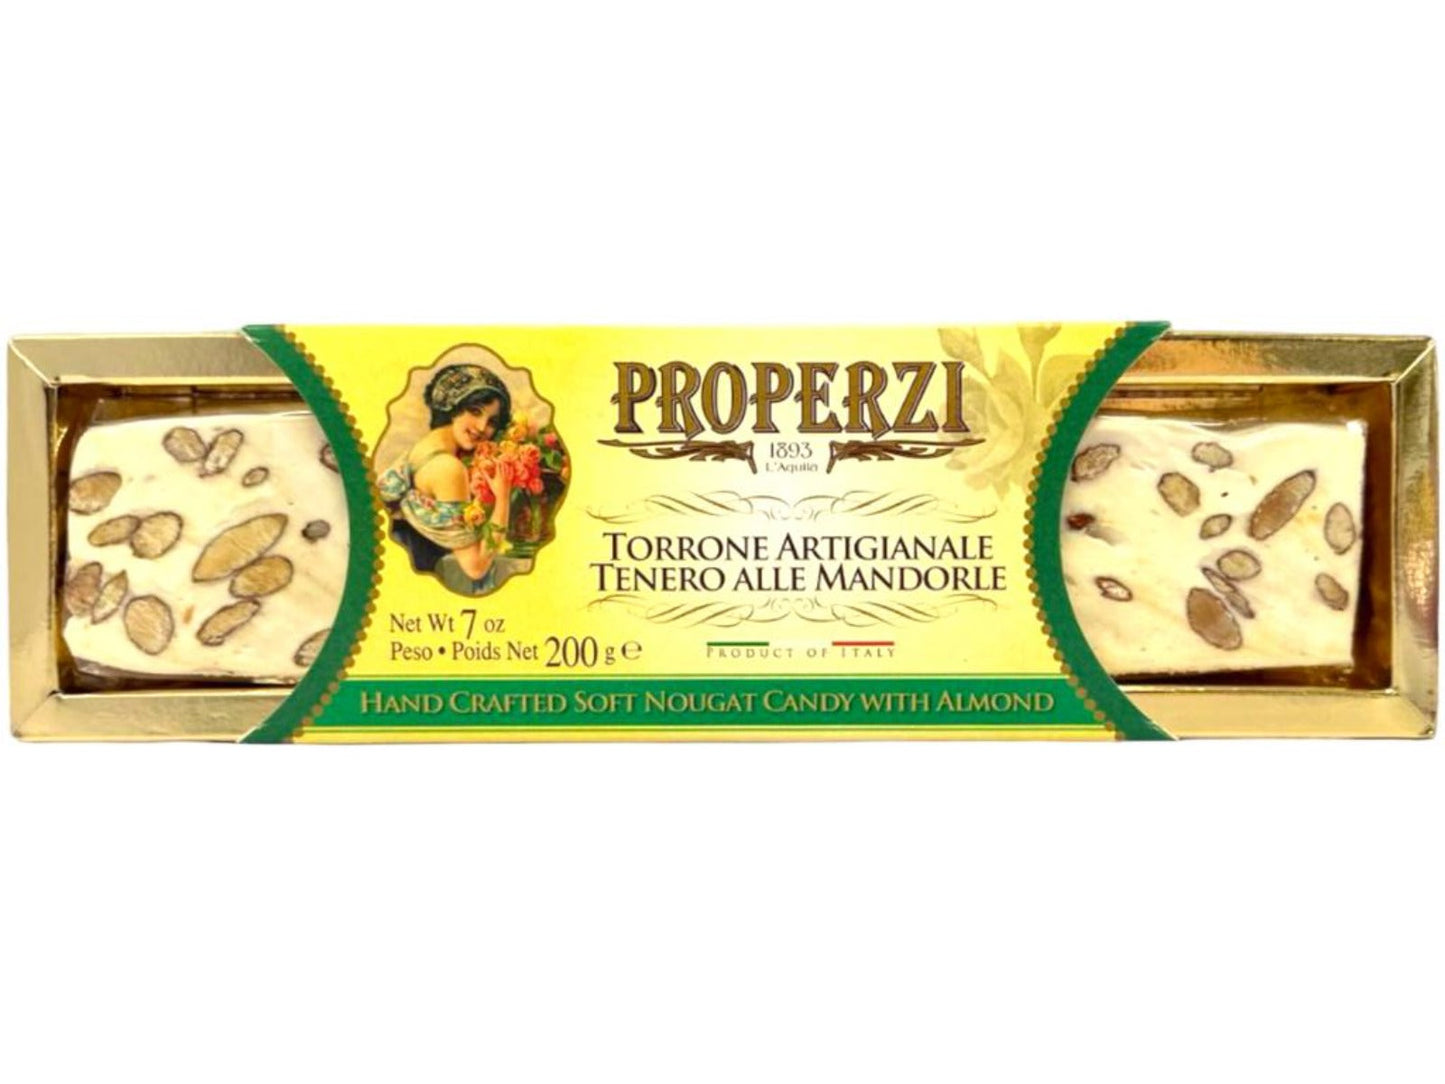 Properzi Italian Hand Crafted Soft Nougat Candy with Almond 200g - 2 Pack Total 400g Best Before End of Feb 2025